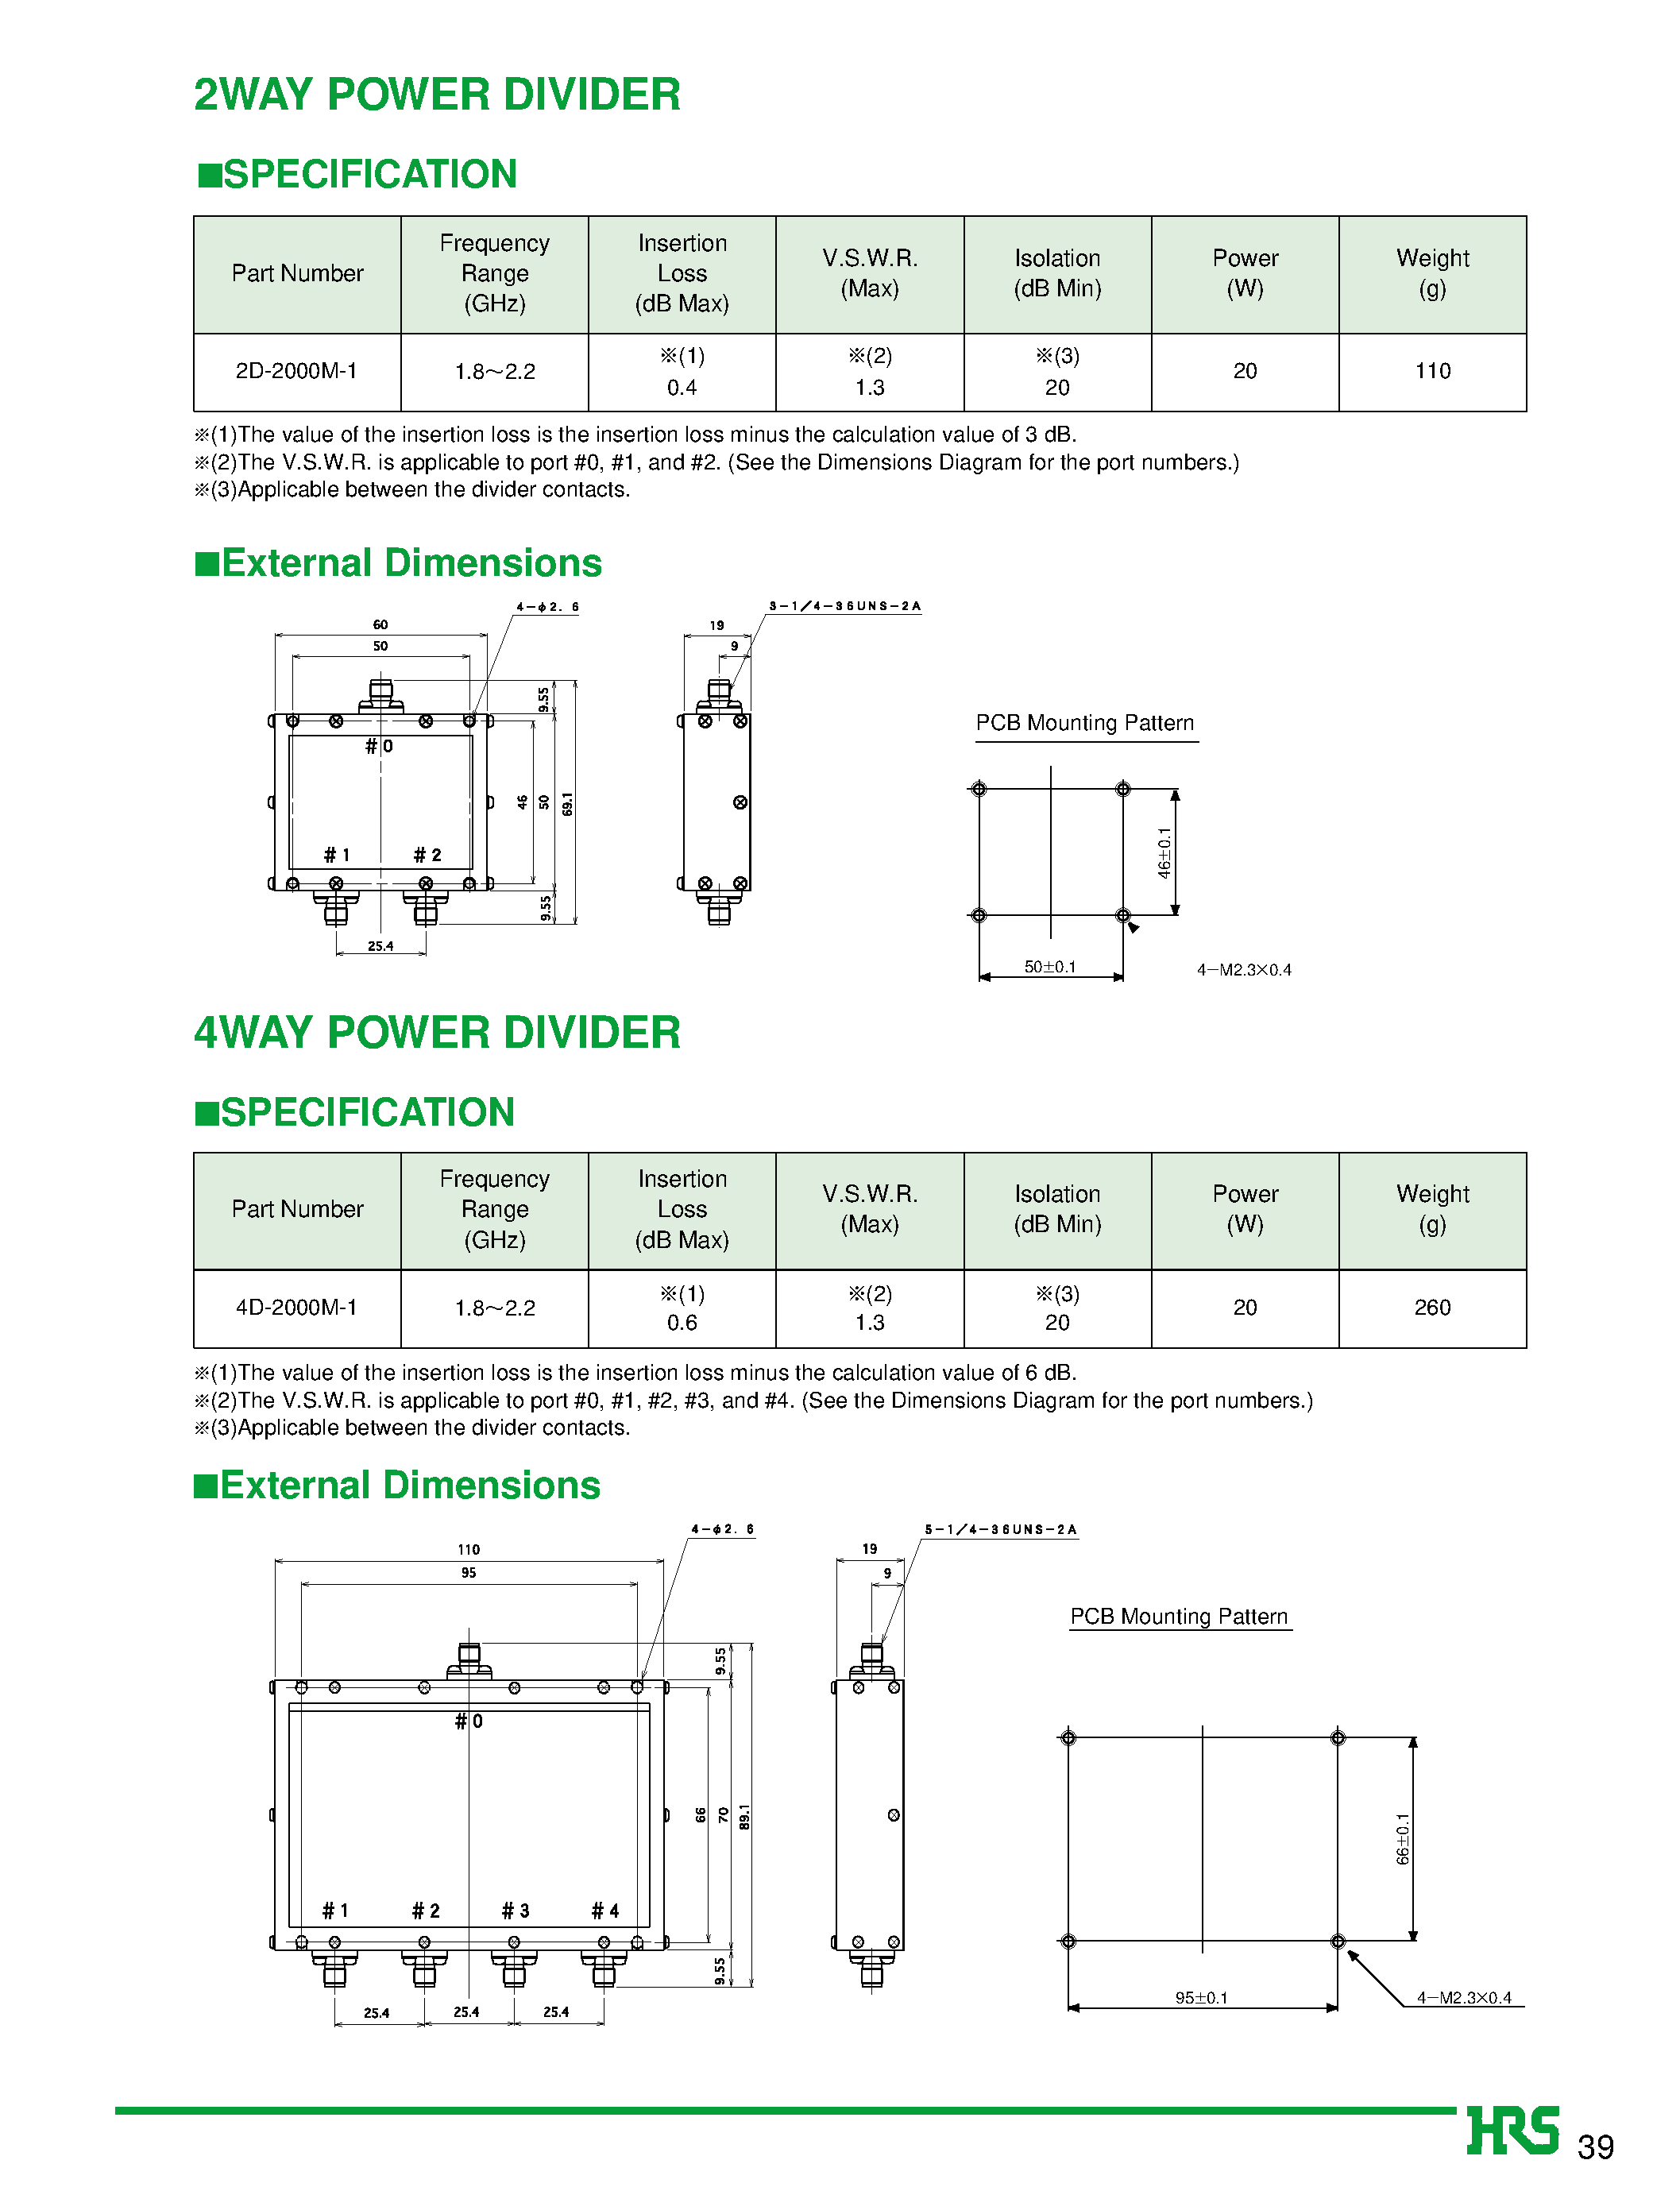 Даташит 2D-2000M-1 - 2 GHz Band Power Dividers/Combiners страница 2